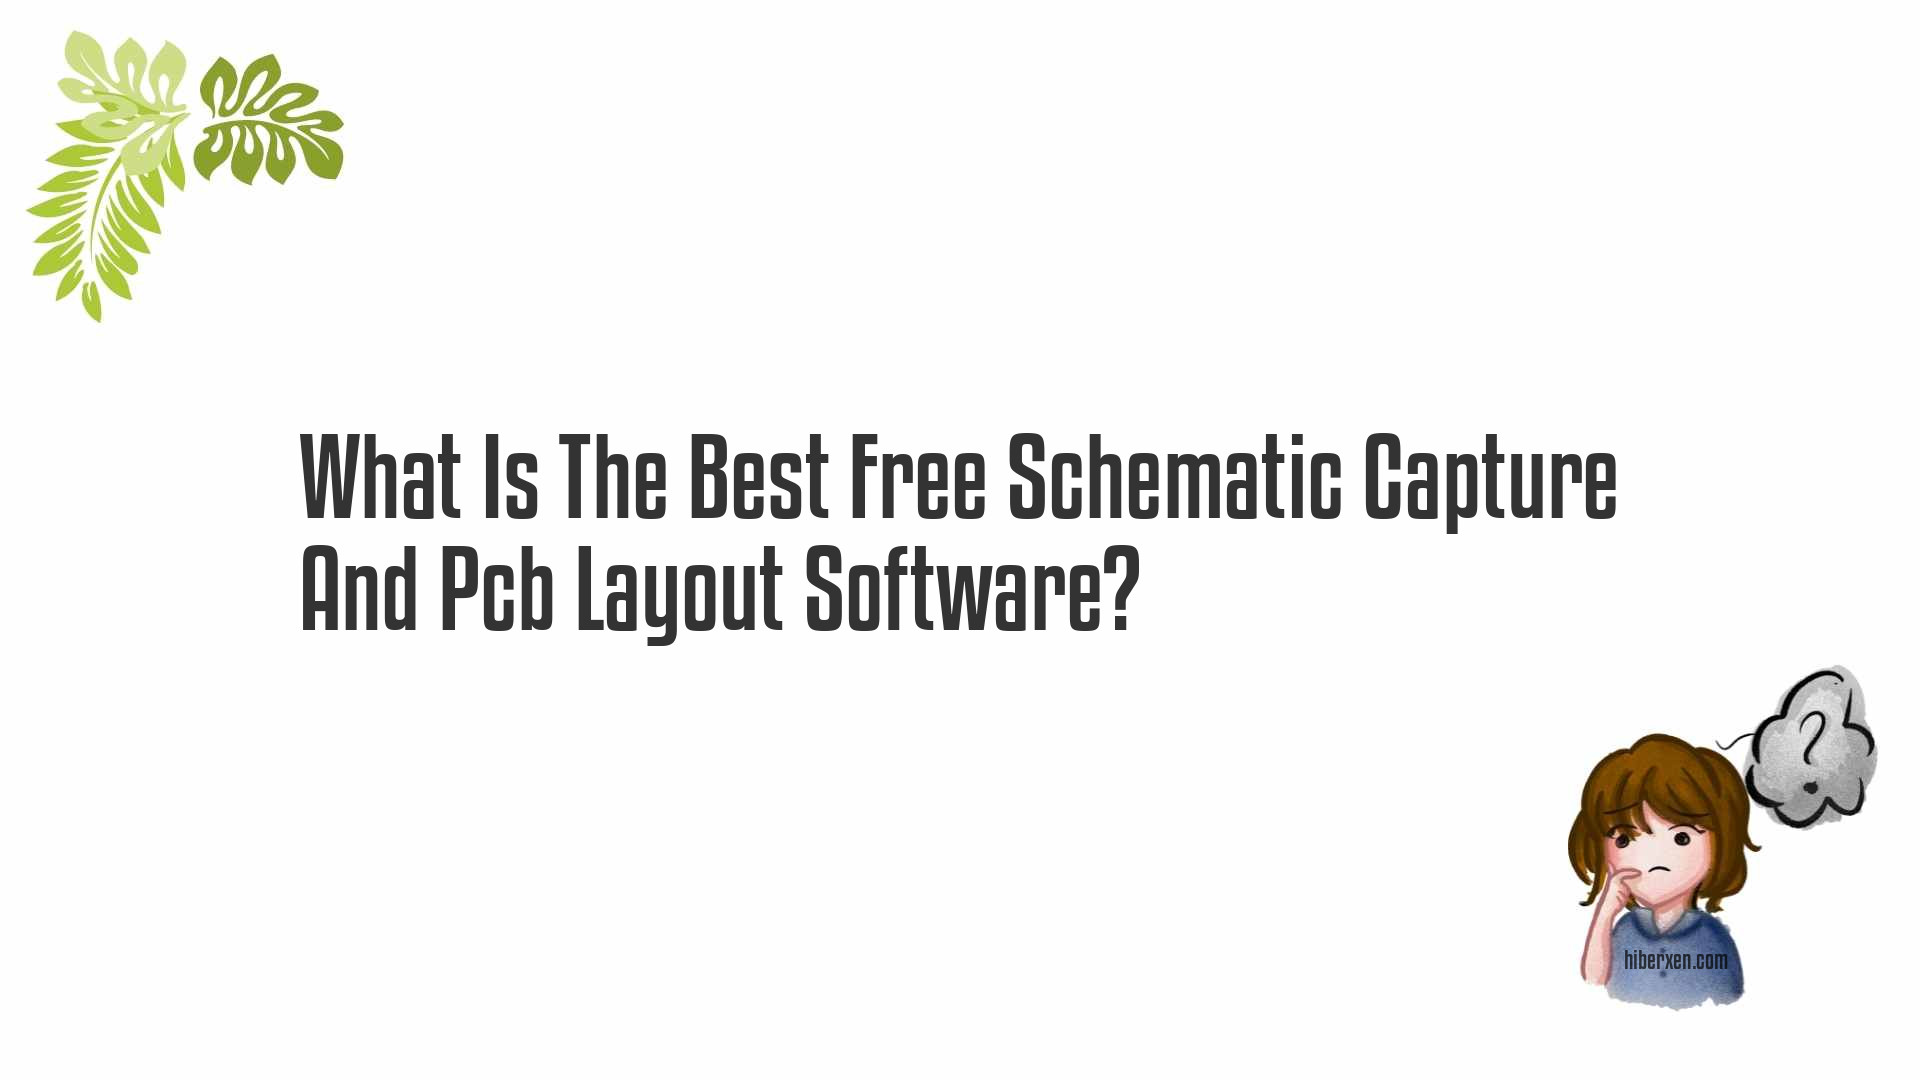 What Is The Best Free Schematic Capture And Pcb Layout Software?